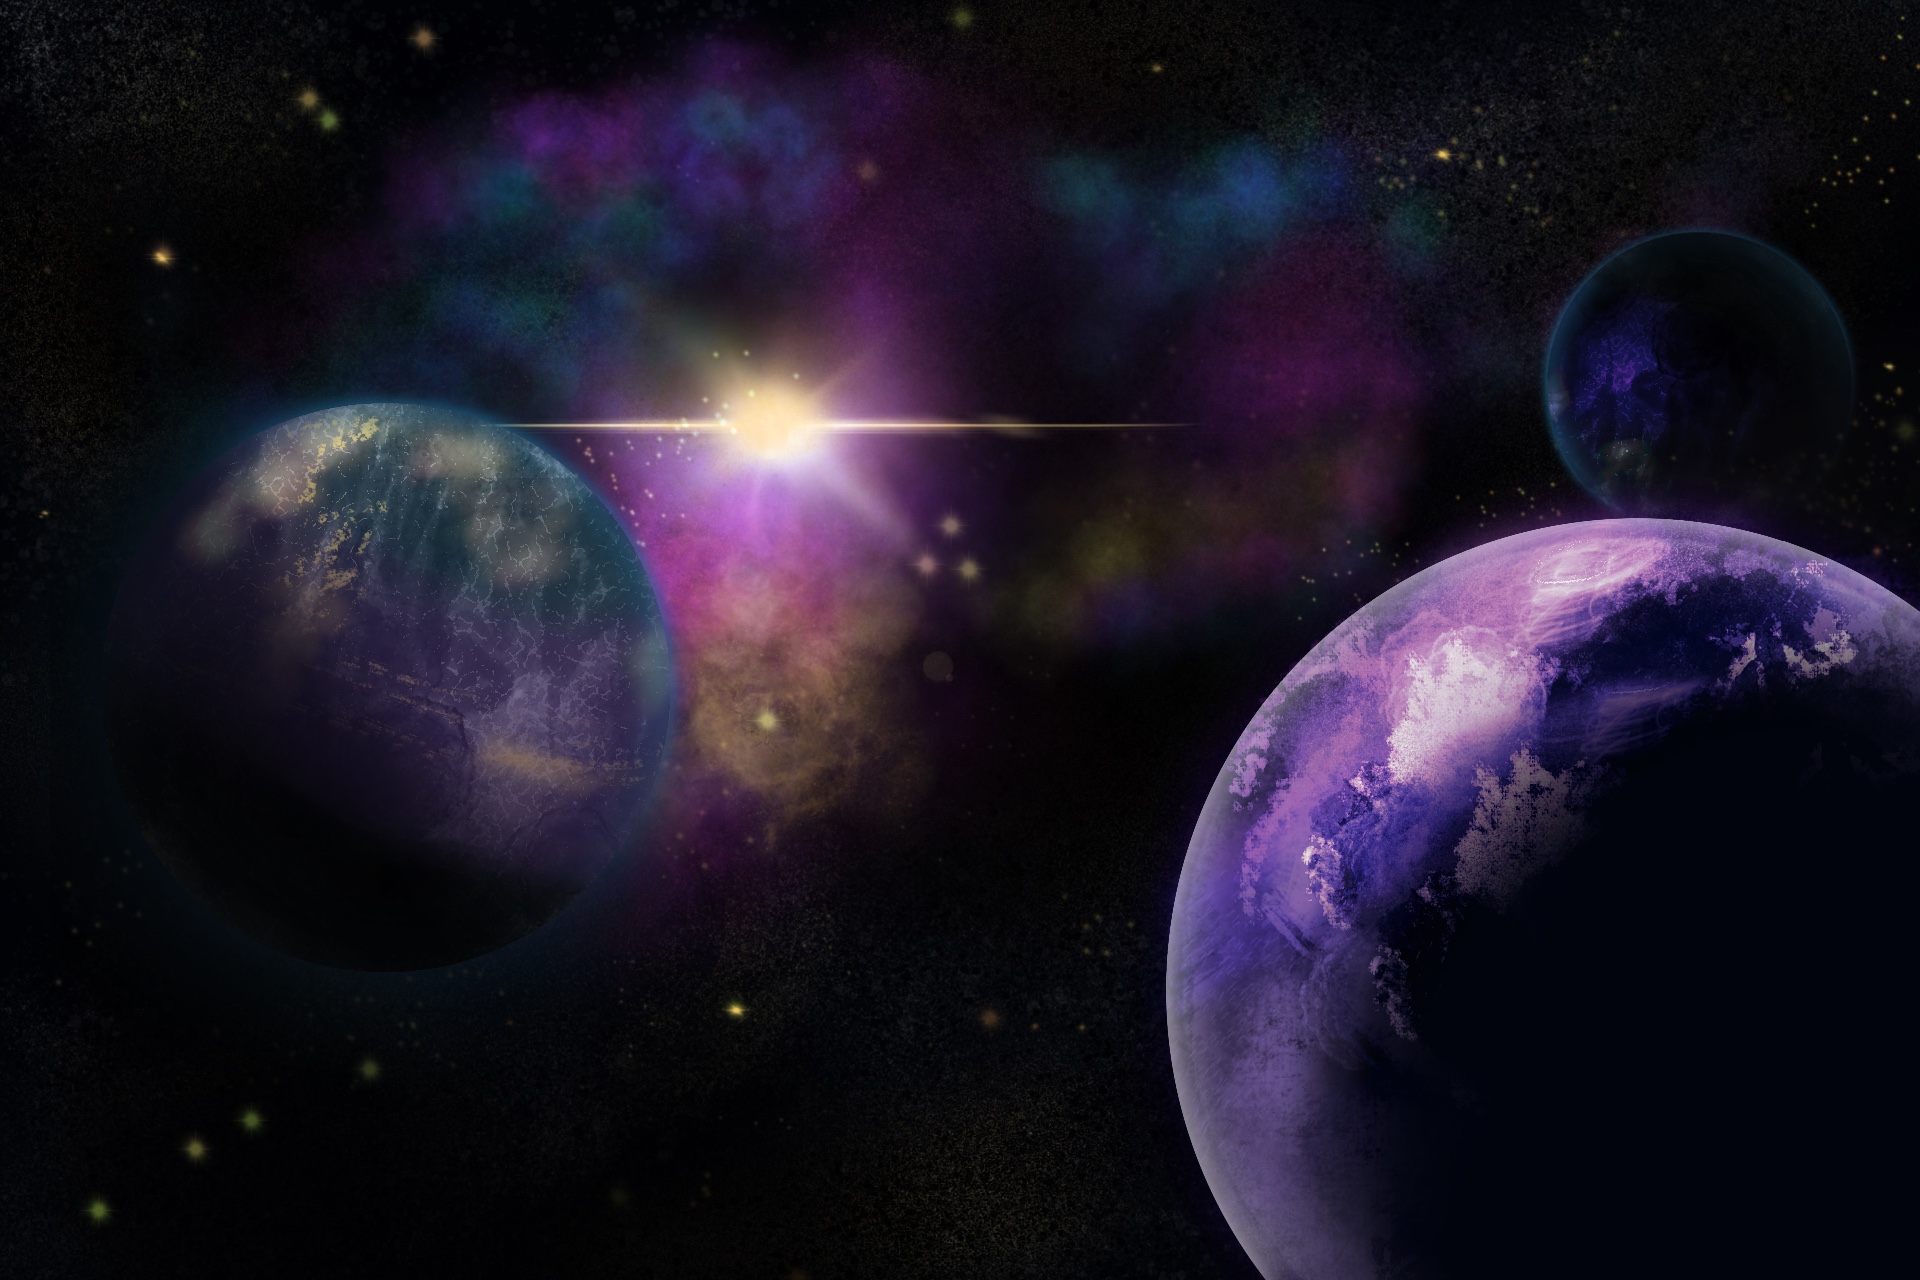 A drawn picture of space, some stars, a nebula and a couple of purple planets.